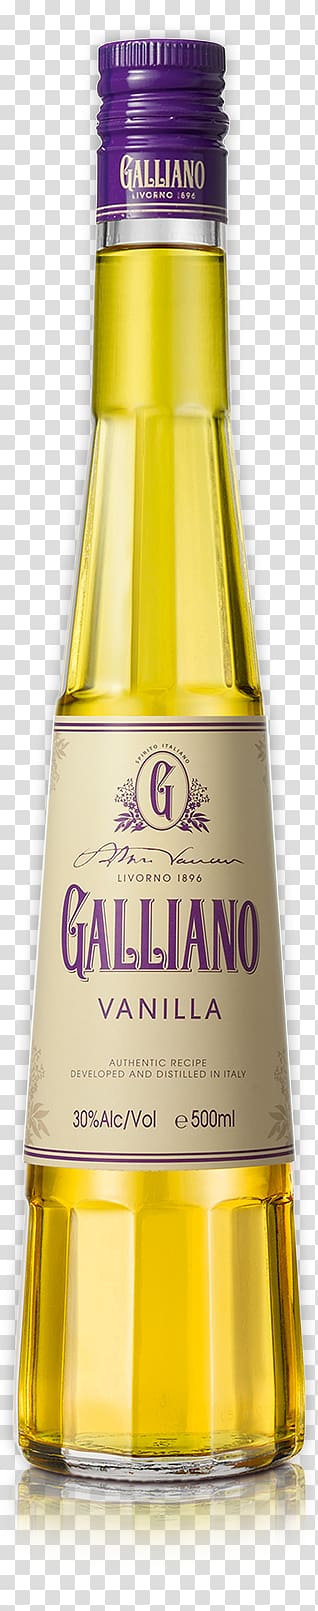 Liqueur Galliano Sambuca Distilled beverage Wine, anise spice transparent background PNG clipart